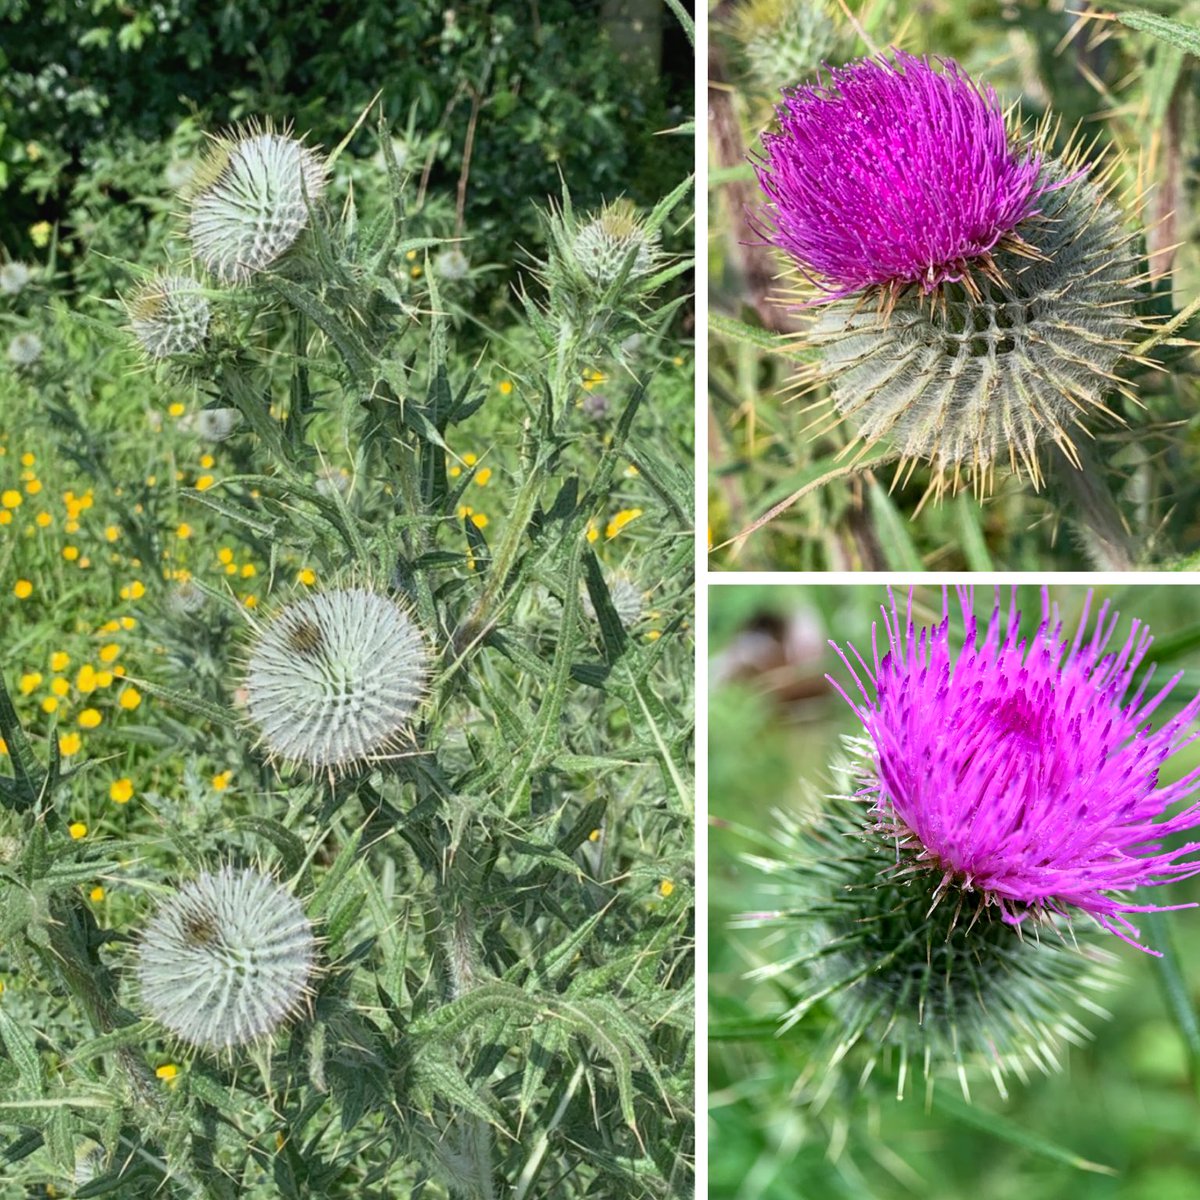 The very spiny Spear Thistle (Cirsium vulgare) #lancashire #daisyfamily #wildflowerhour ⁦@BSBIbotany⁩